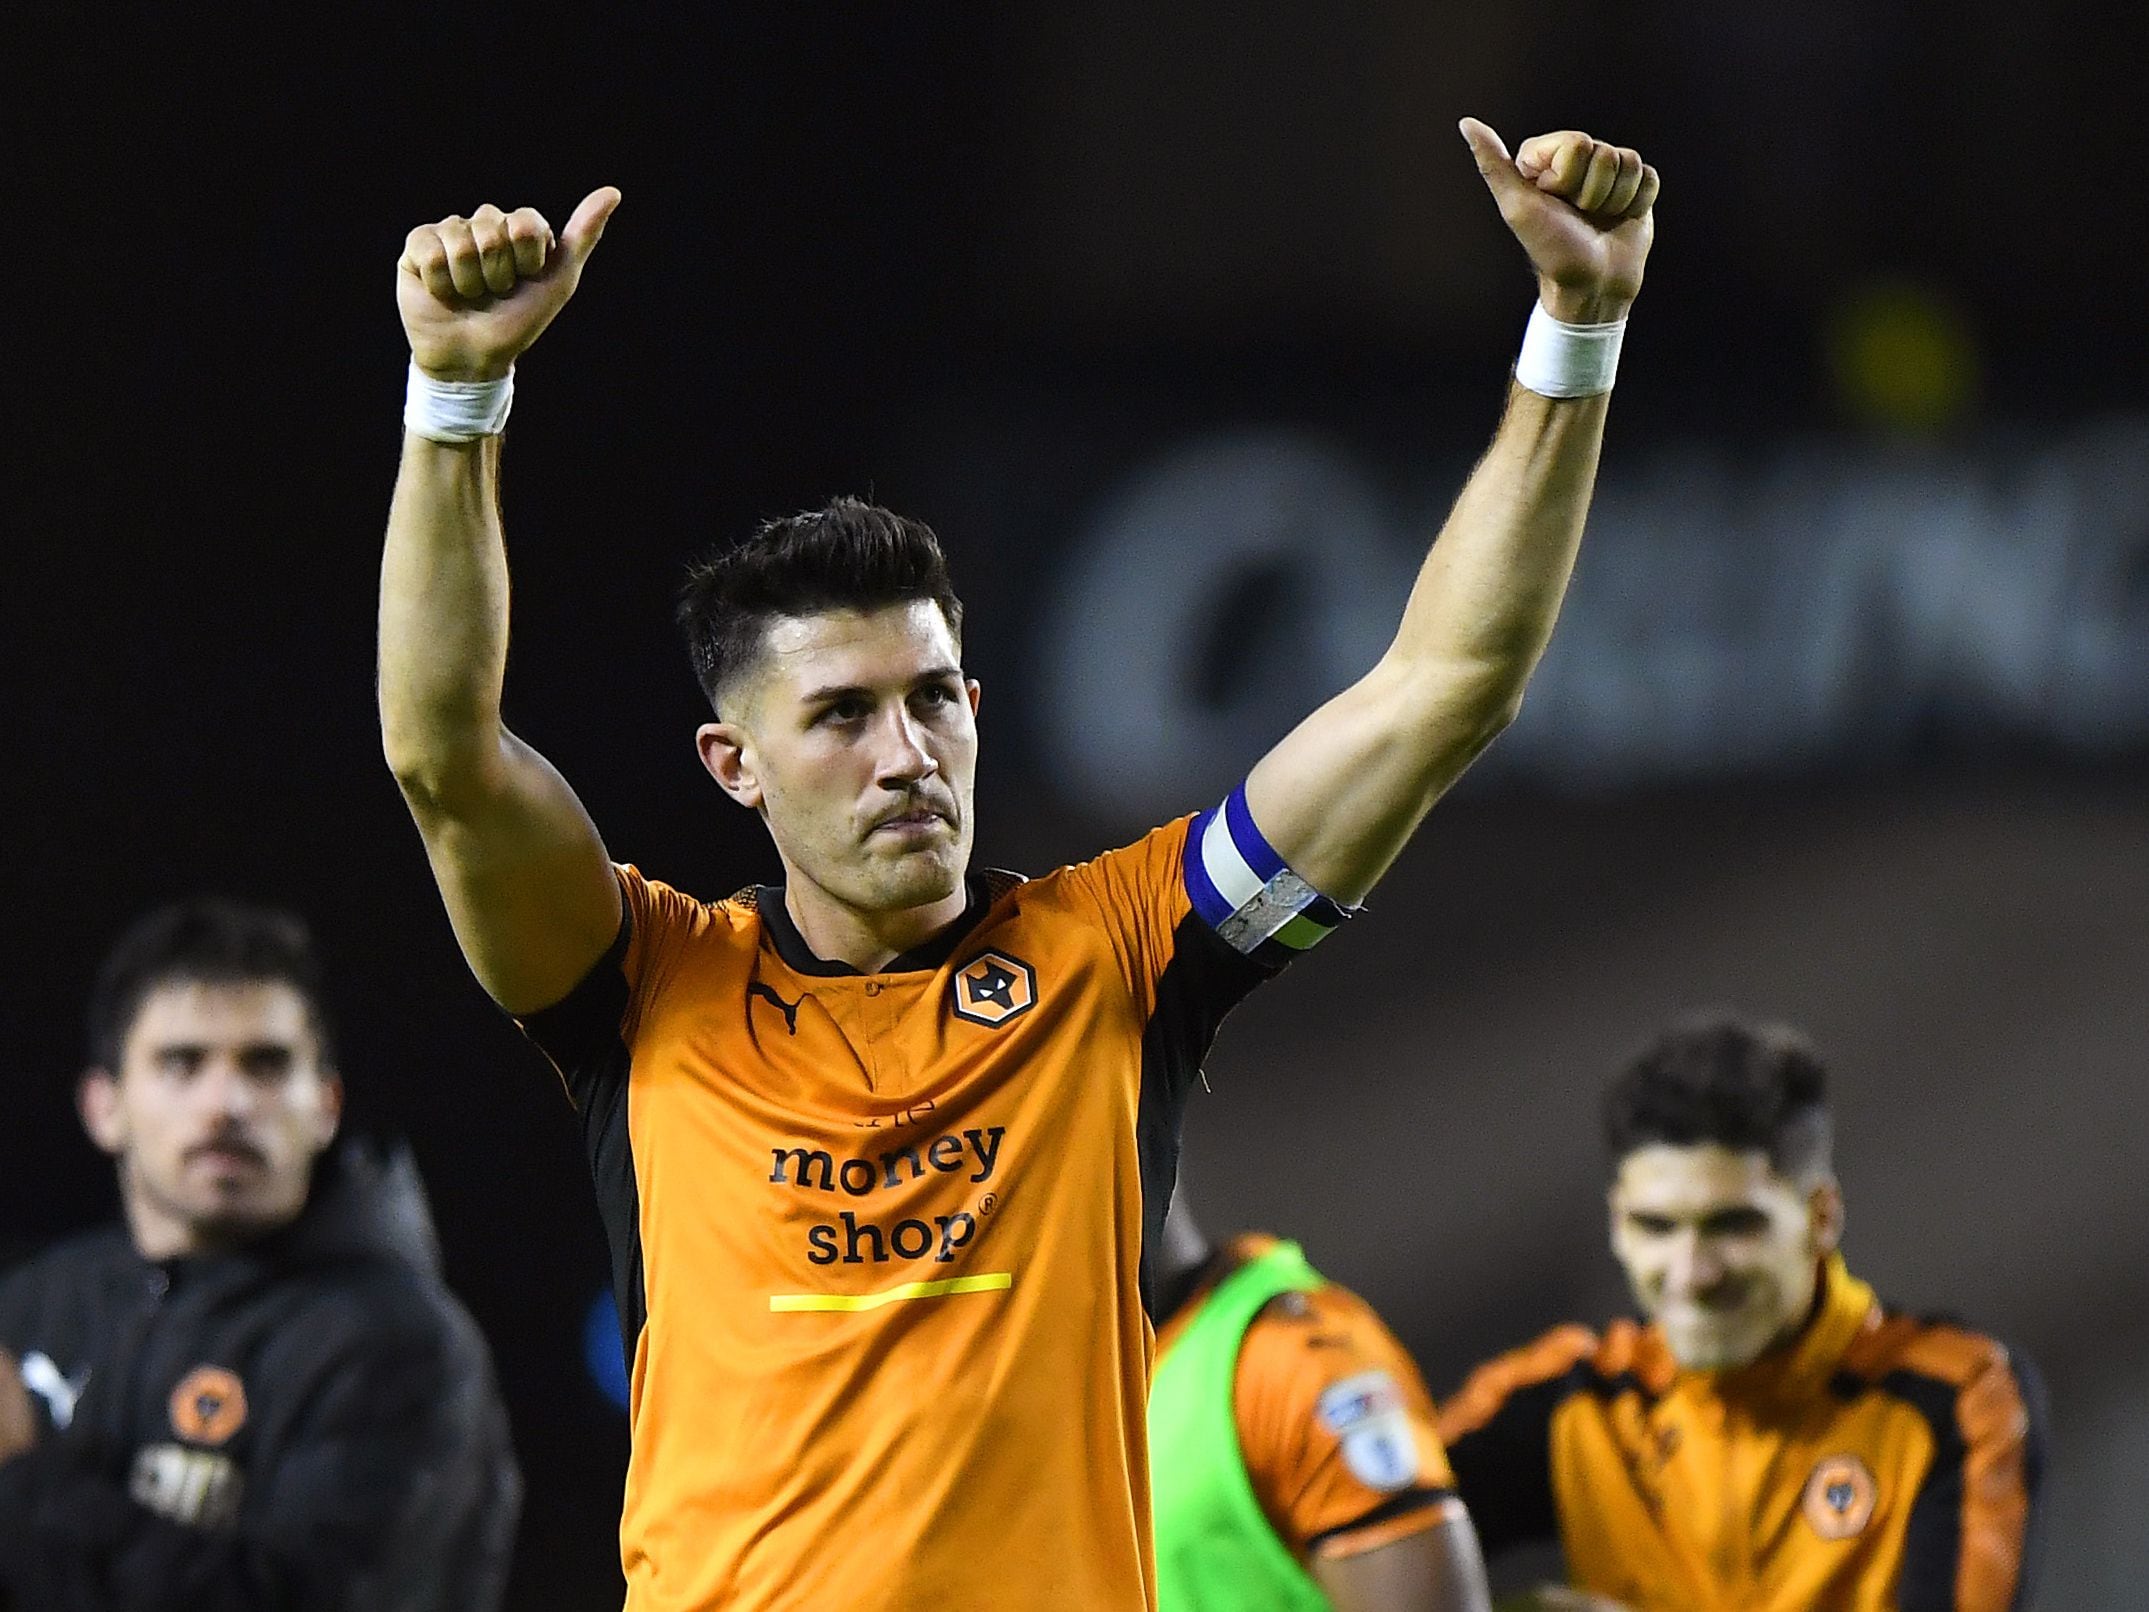 Exclusive: Former Wolves captain back training with the club